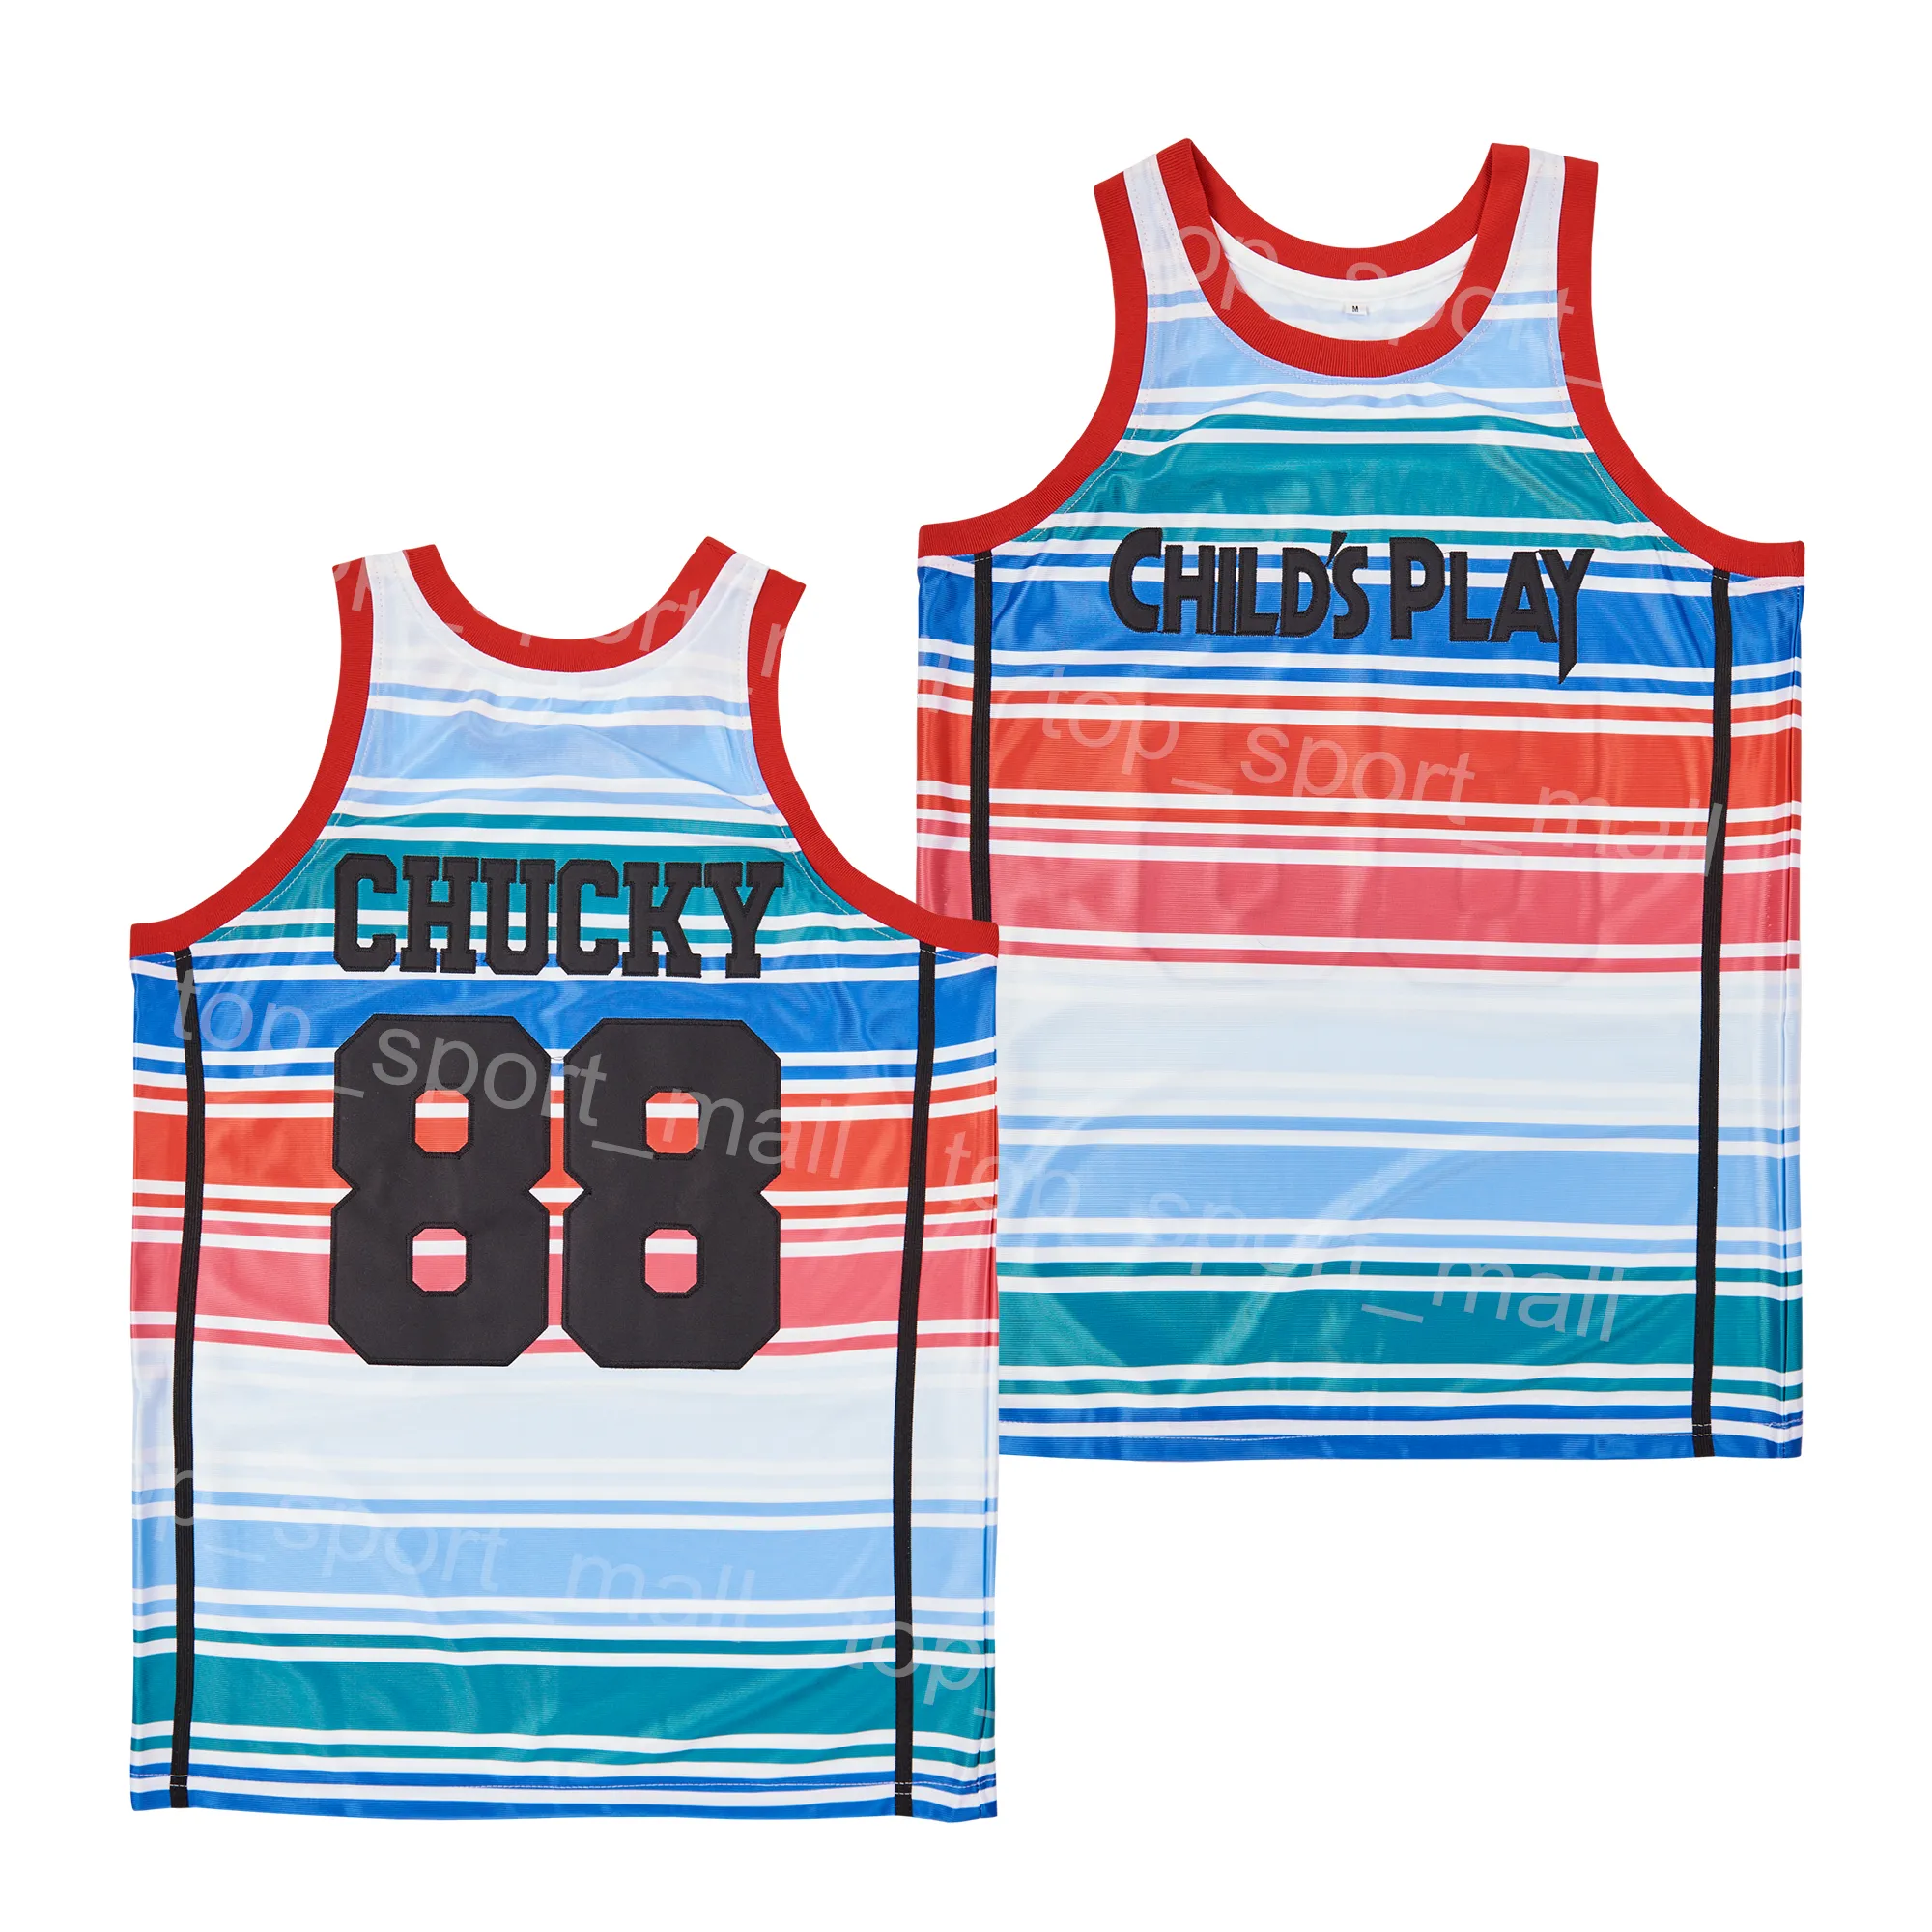 Movie Basketball Film 1988 Chucky 88 Child's Play Jersey High School Summer Breathable Retro HipHop For Sport Fans Pure Cotton College Shirt HipHop Team White